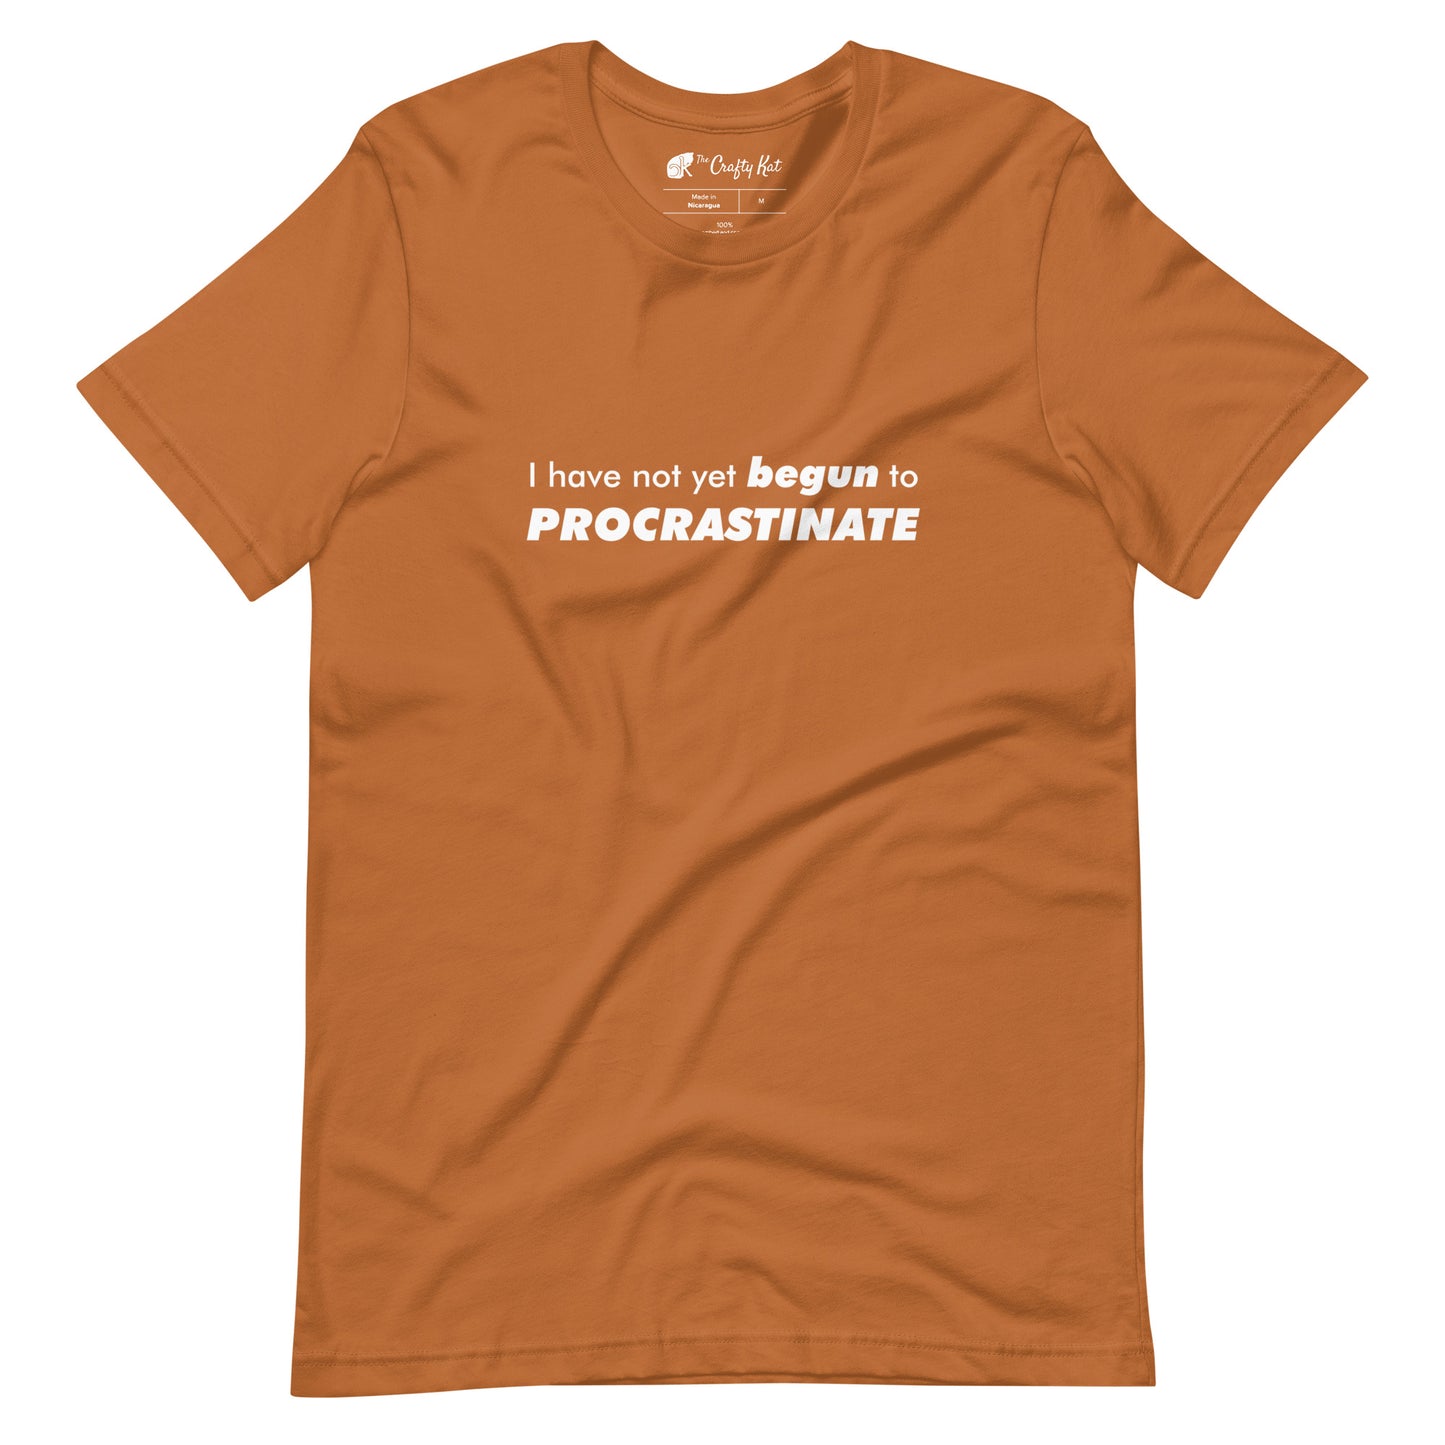 Toast (light orange) t-shirt with text graphic: "I have not yet BEGUN to PROCRASTINATE"